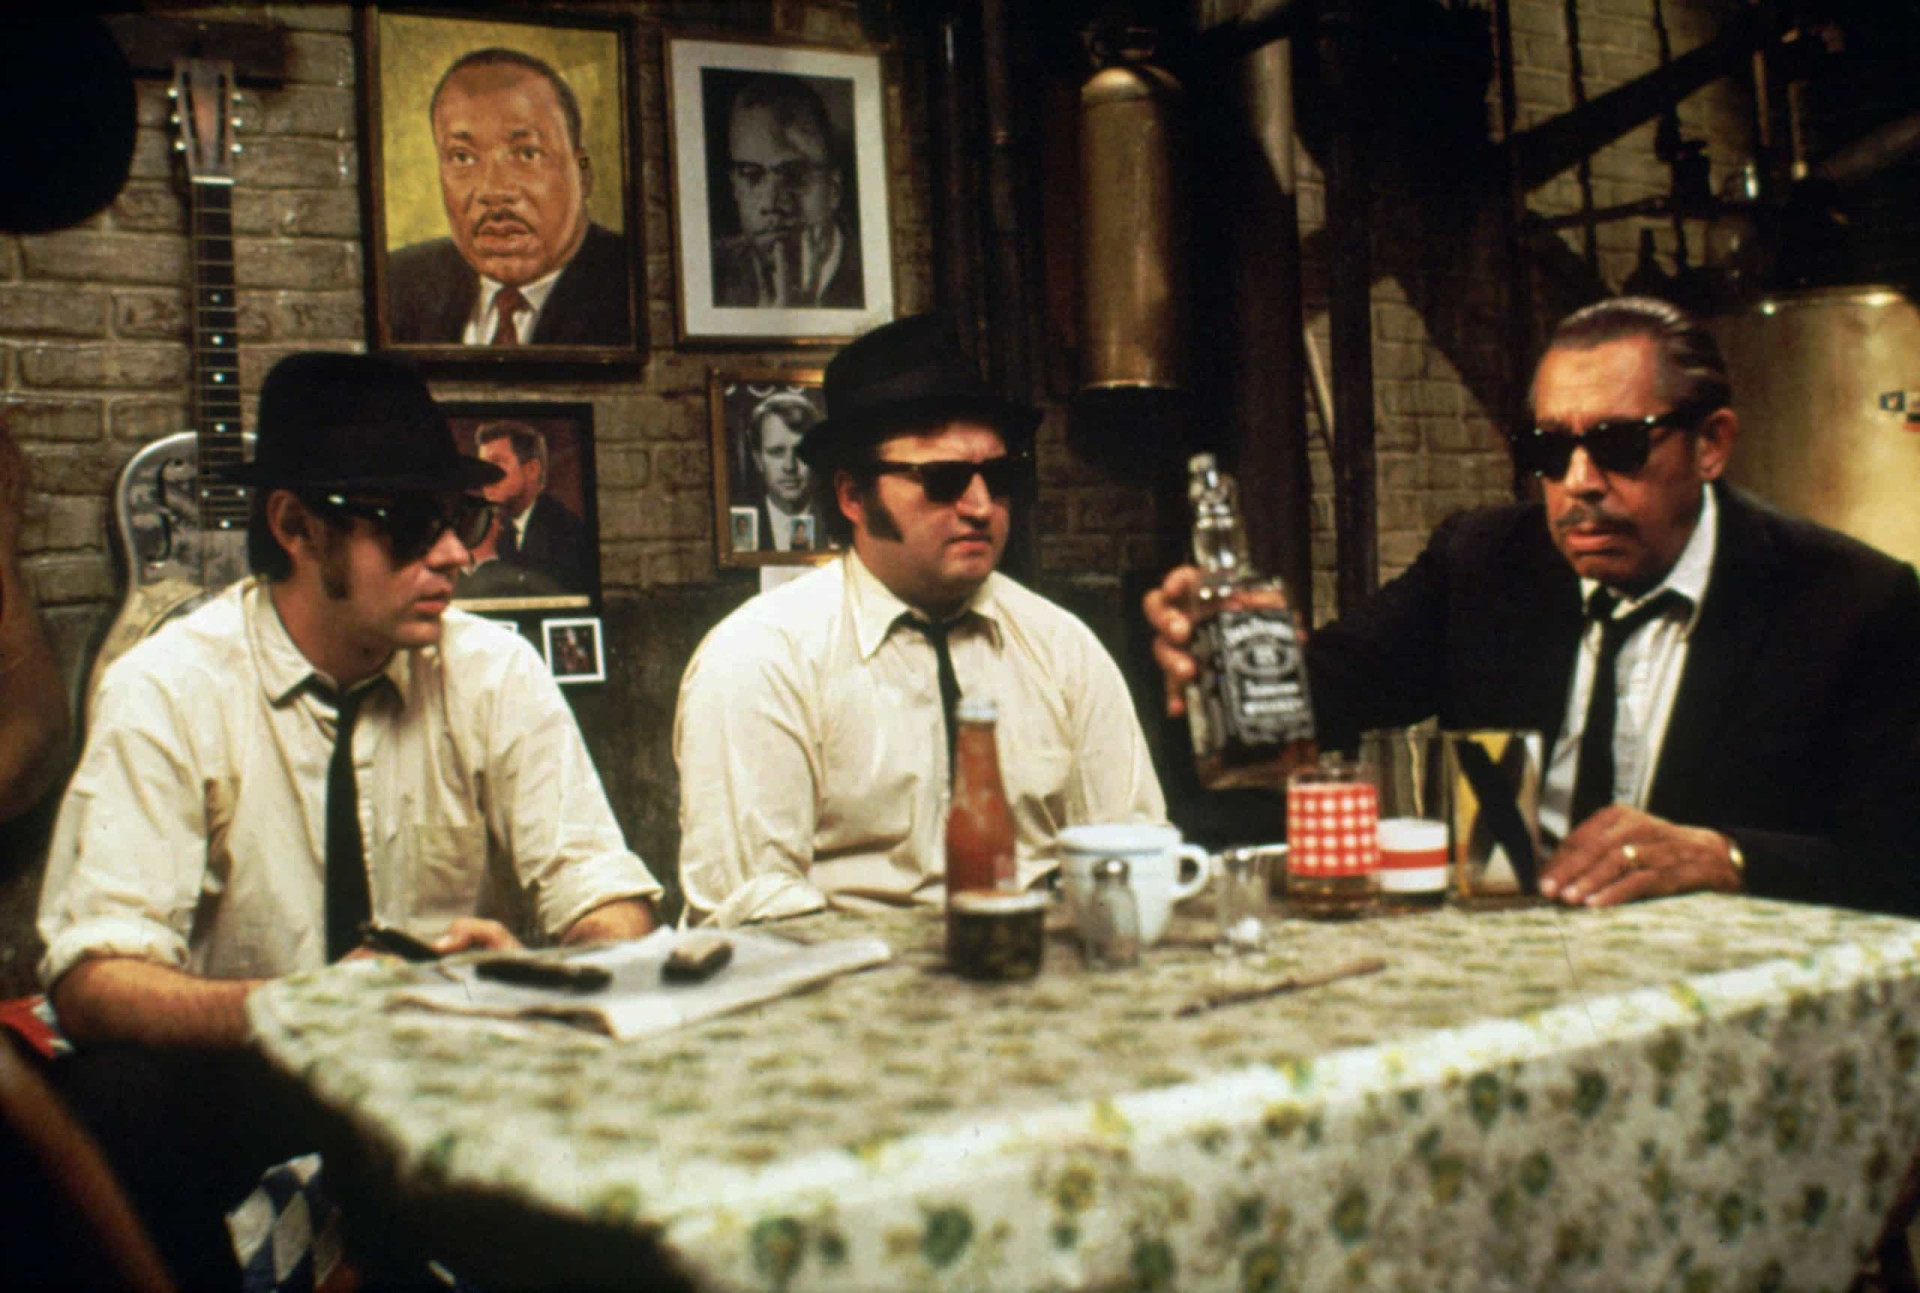 <p>John Belushi and Dan Aykroyd are the blues-loving protagonists of this memorable movie. Fresh out of jail and trying to stick to the straight-and-narrow, they embark on a wild ride around Illinois trying to raise money for a Catholic orphanage threatened with closure.</p><p>You may also like:<a href="https://www.starsinsider.com/n/241732?utm_source=msn.com&utm_medium=display&utm_campaign=referral_description&utm_content=481087v5en-us"> Is that even legal? The world's most bizarre laws</a></p>